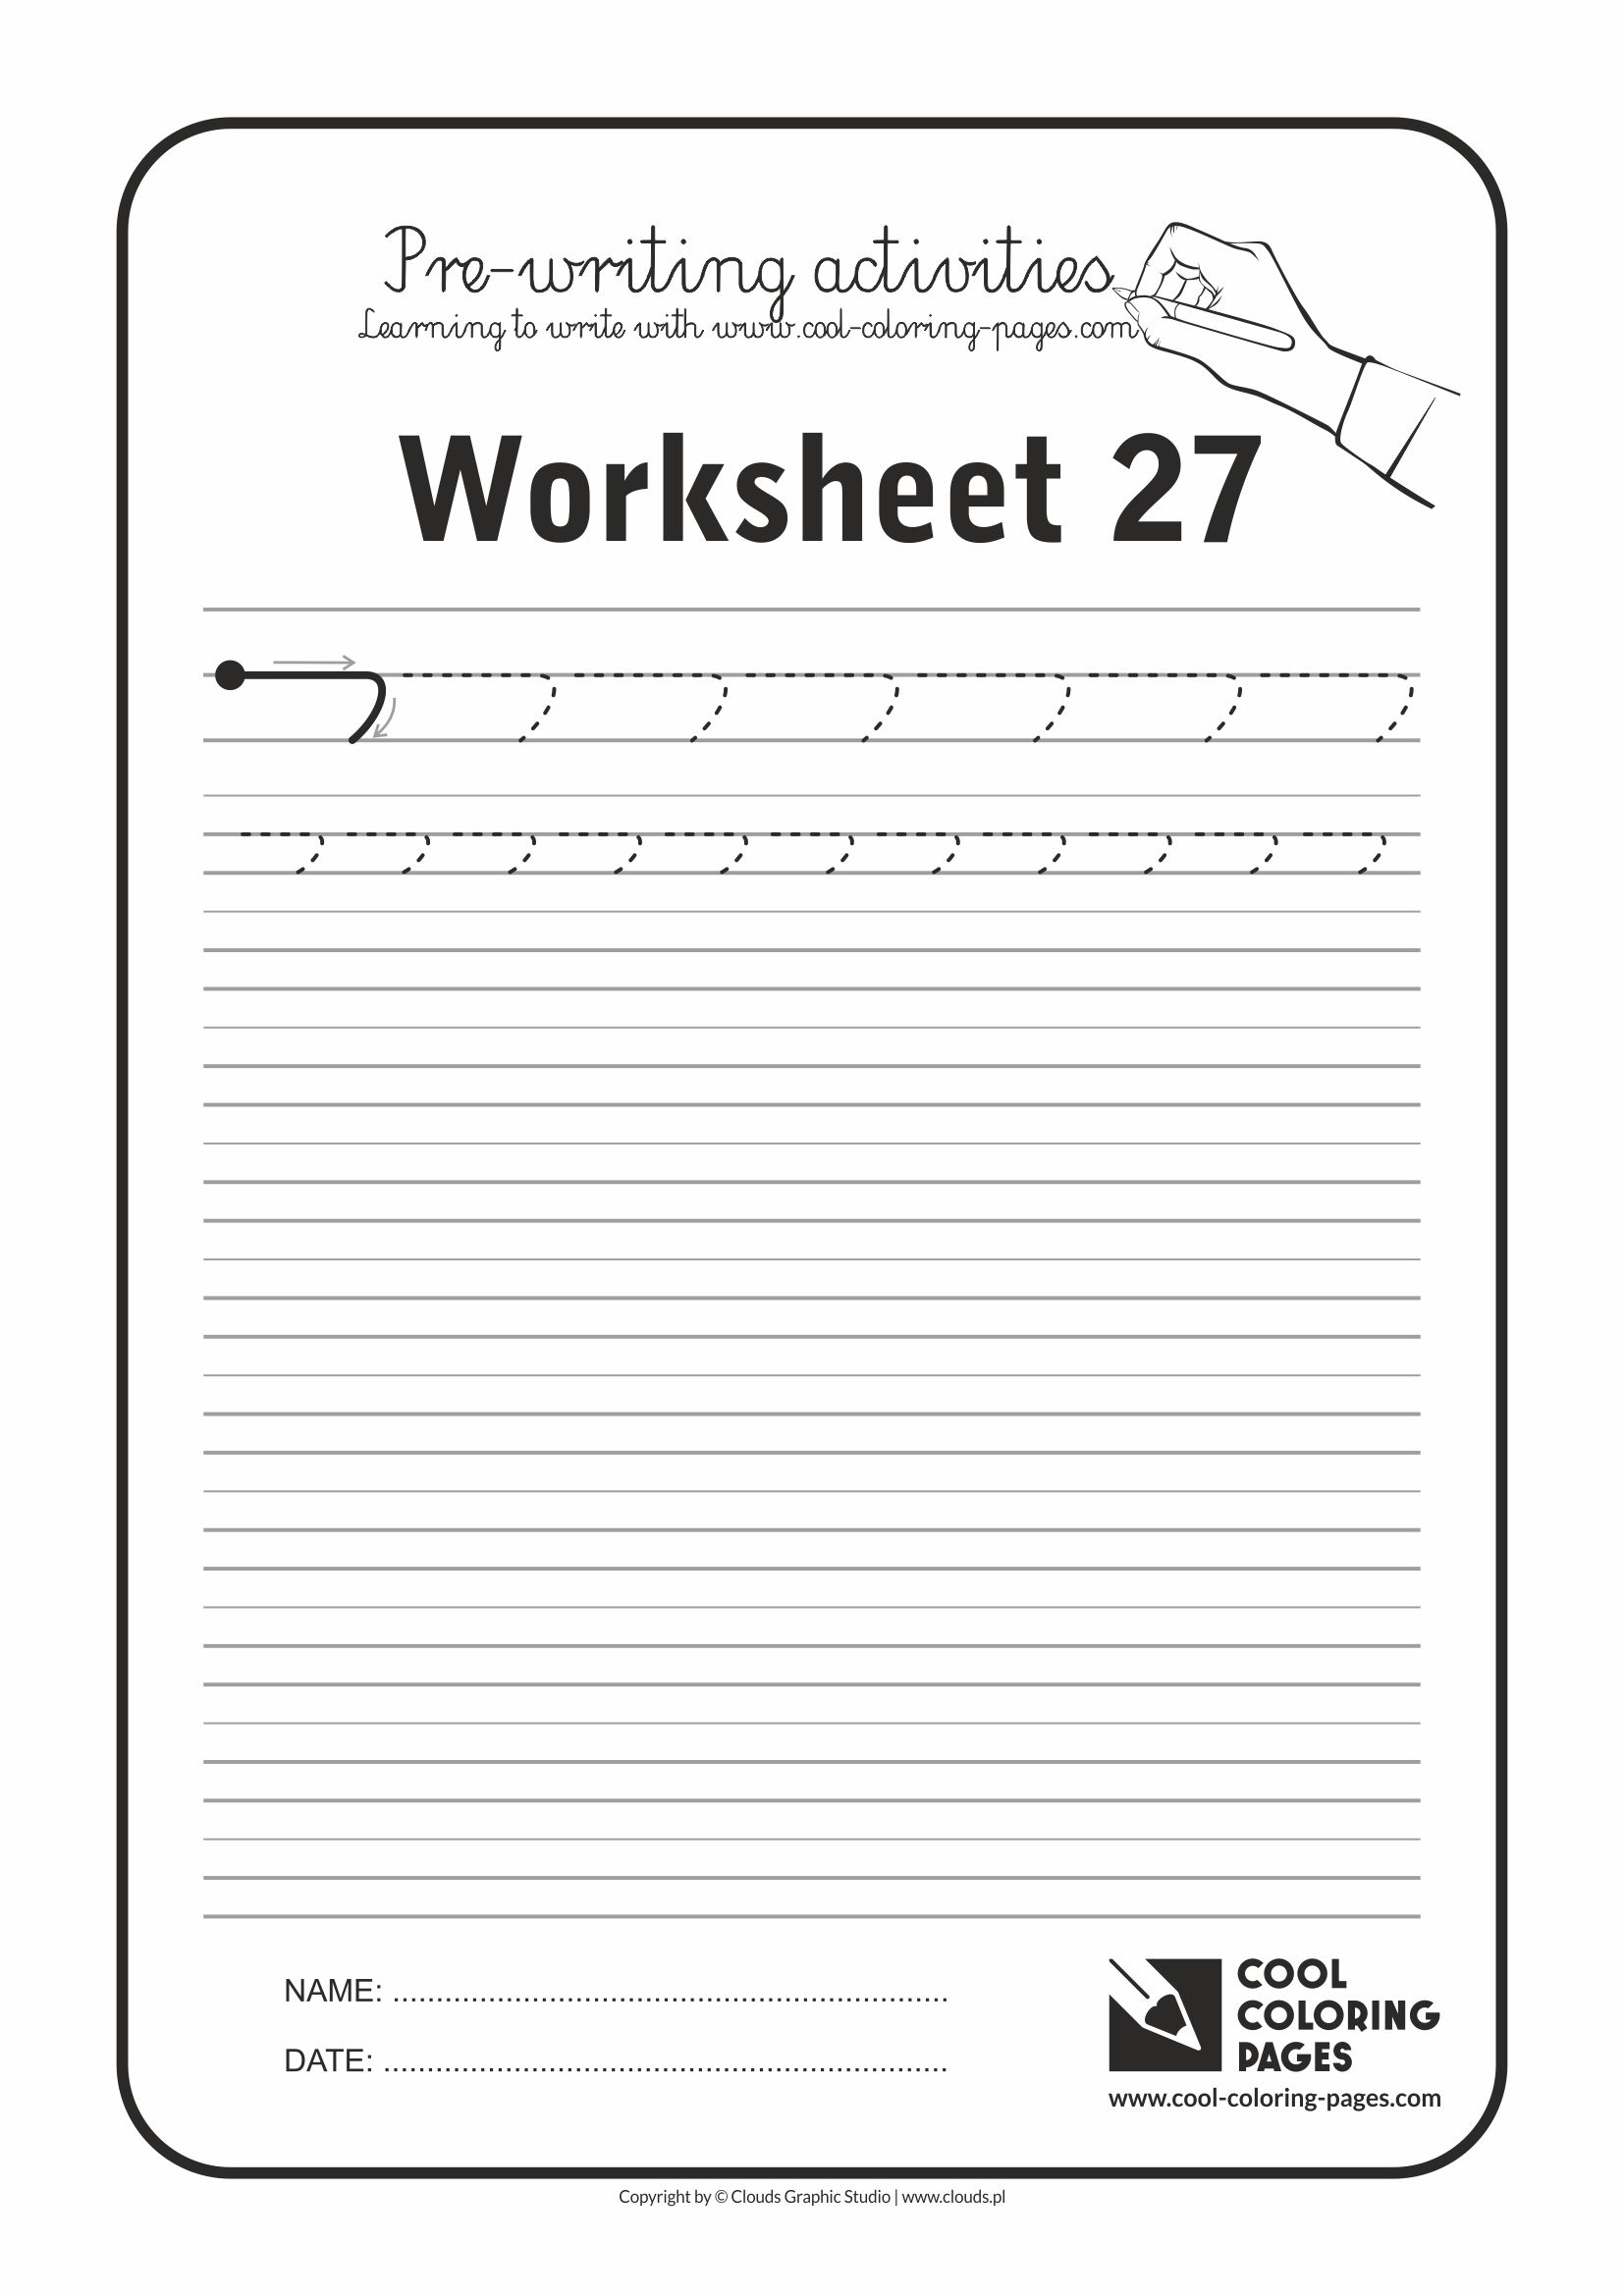 Cool Coloring Pages / Pre-writing activities / Worksheet no.27